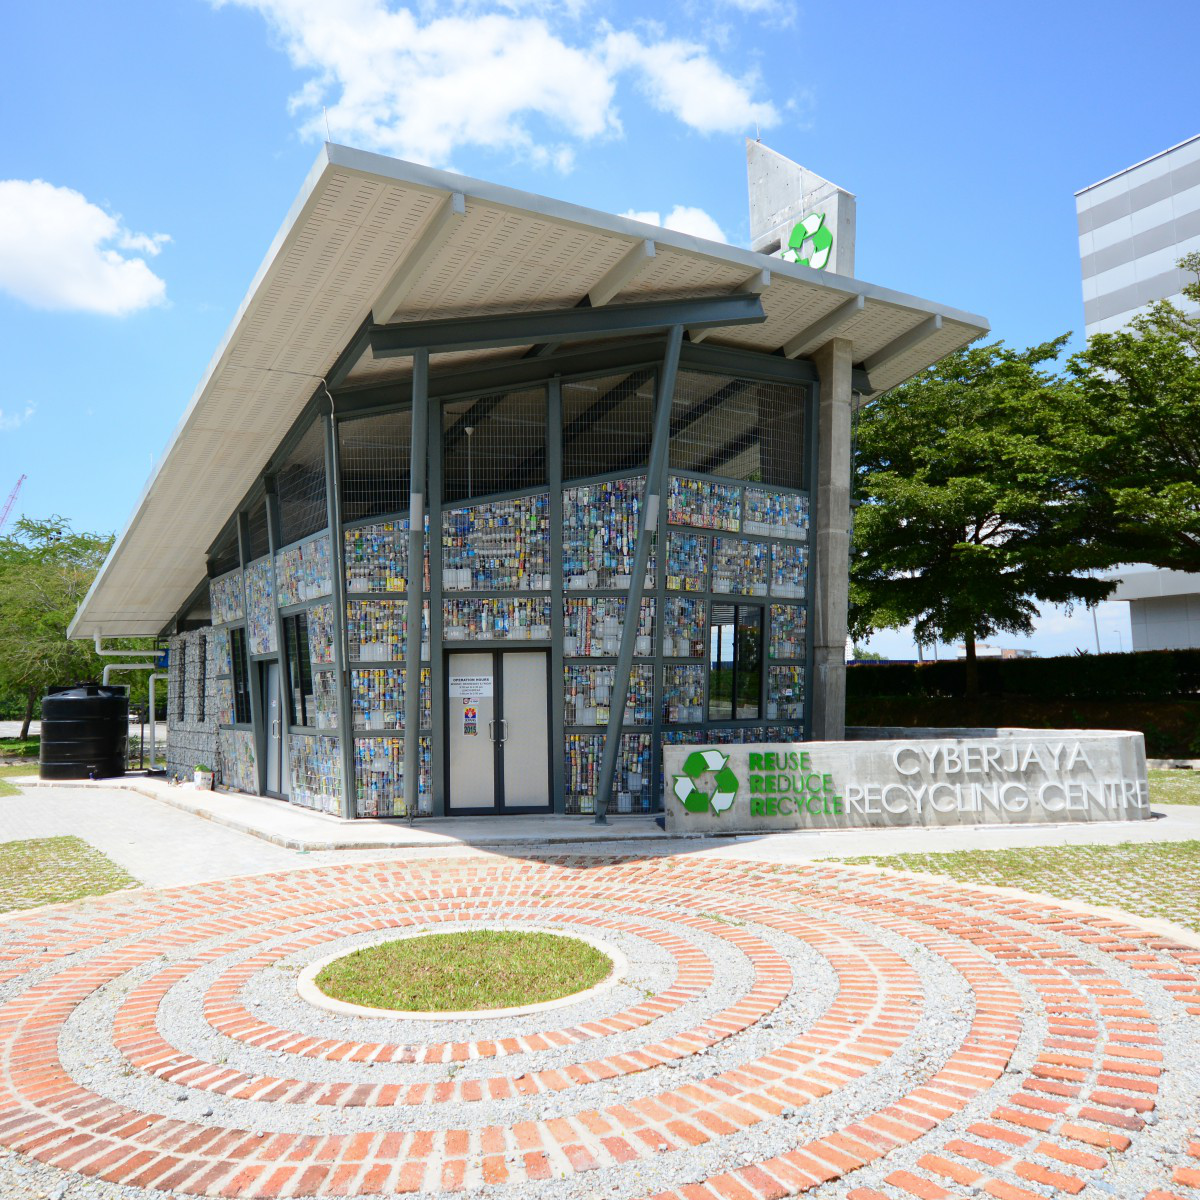 Recycle Collection Center, Cyberjaya <b>Recycle Collection Center